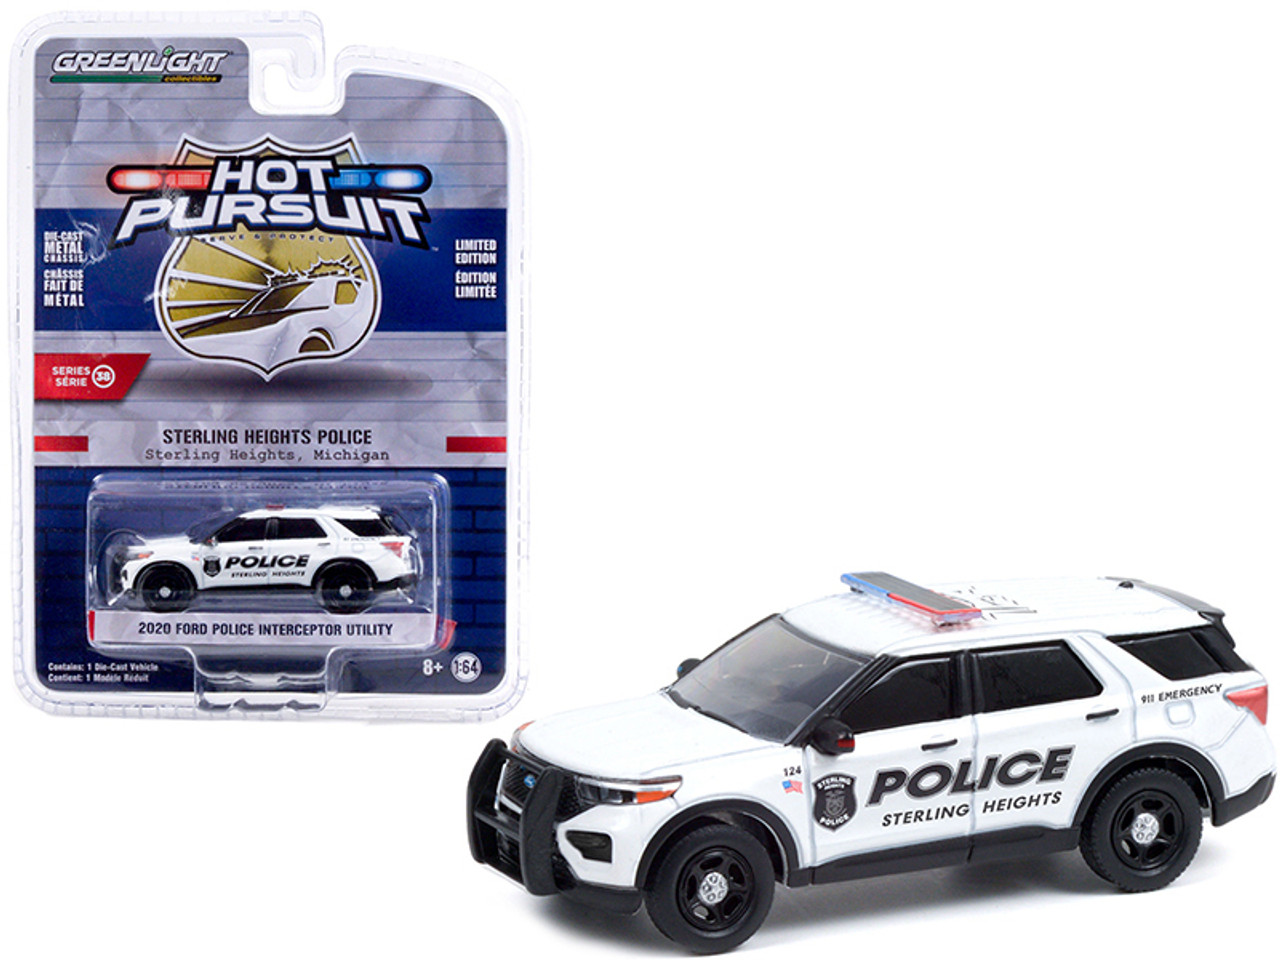 2020 Ford Police Interceptor Utility White "Sterling Heights Police" (Michigan) "Hot Pursuit" Series 38 1/64 Diecast Model Car by Greenlight